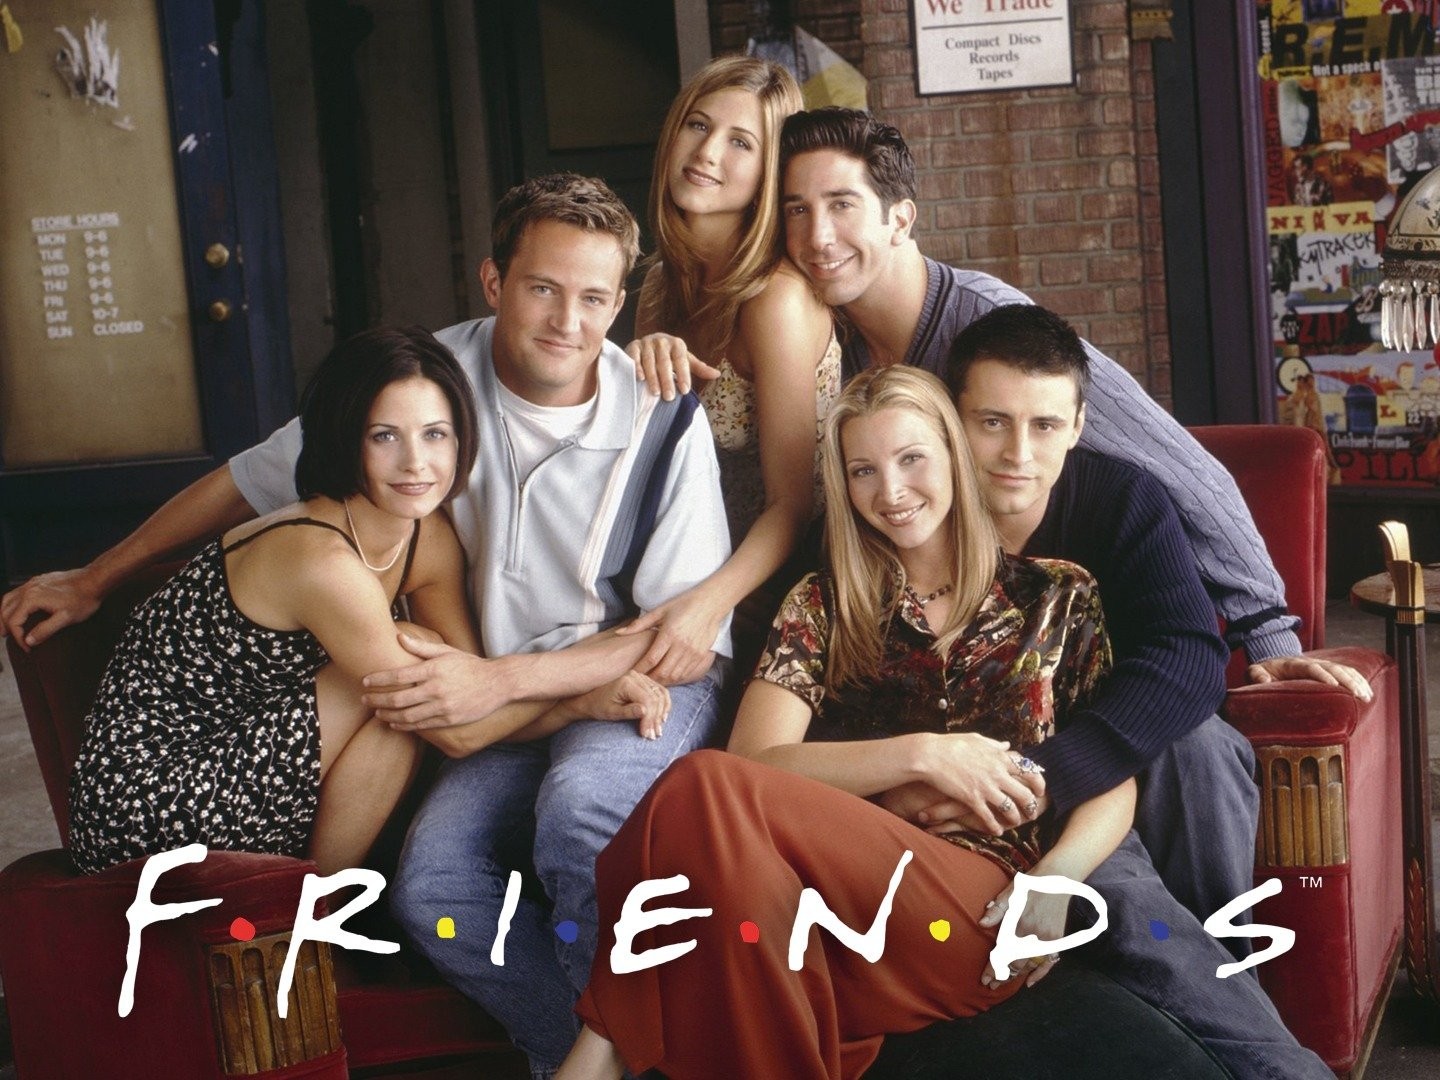 How to watch A Spy Among Friends online: stream all episodes of